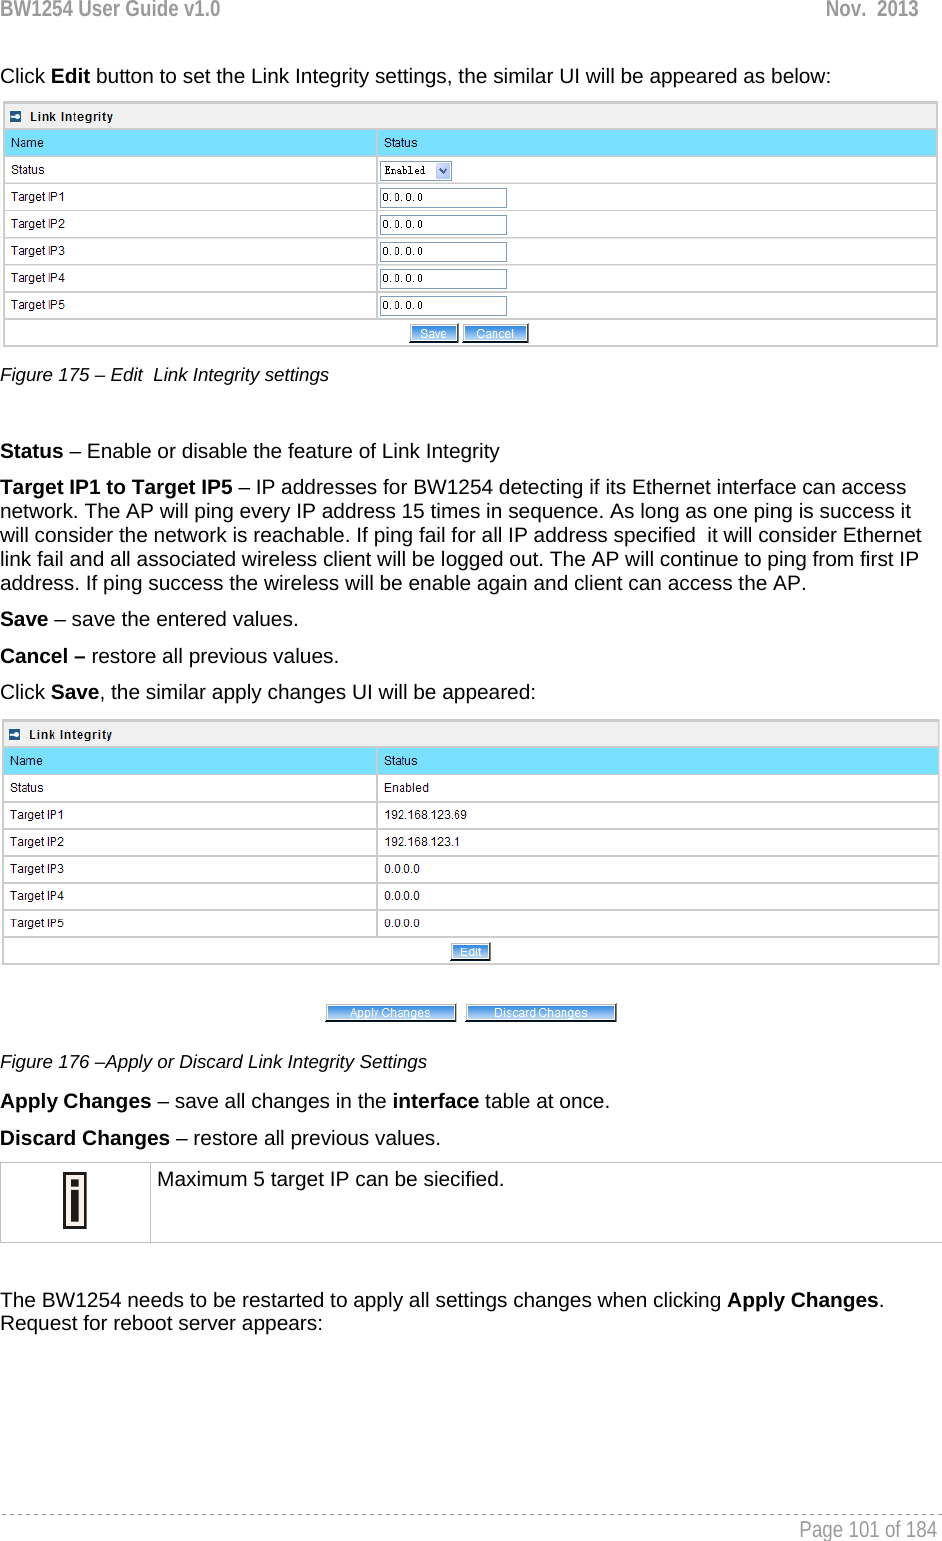 BW1254 User Guide v1.0  Nov.  2013     Page 101 of 184   Click Edit button to set the Link Integrity settings, the similar UI will be appeared as below:  Figure 175 – Edit  Link Integrity settings  Status – Enable or disable the feature of Link Integrity Target IP1 to Target IP5 – IP addresses for BW1254 detecting if its Ethernet interface can access  network. The AP will ping every IP address 15 times in sequence. As long as one ping is success it will consider the network is reachable. If ping fail for all IP address specified  it will consider Ethernet link fail and all associated wireless client will be logged out. The AP will continue to ping from first IP address. If ping success the wireless will be enable again and client can access the AP. Save – save the entered values. Cancel – restore all previous values. Click Save, the similar apply changes UI will be appeared:  Figure 176 –Apply or Discard Link Integrity Settings Apply Changes – save all changes in the interface table at once. Discard Changes – restore all previous values.  Maximum 5 target IP can be siecified.  The BW1254 needs to be restarted to apply all settings changes when clicking Apply Changes. Request for reboot server appears: 